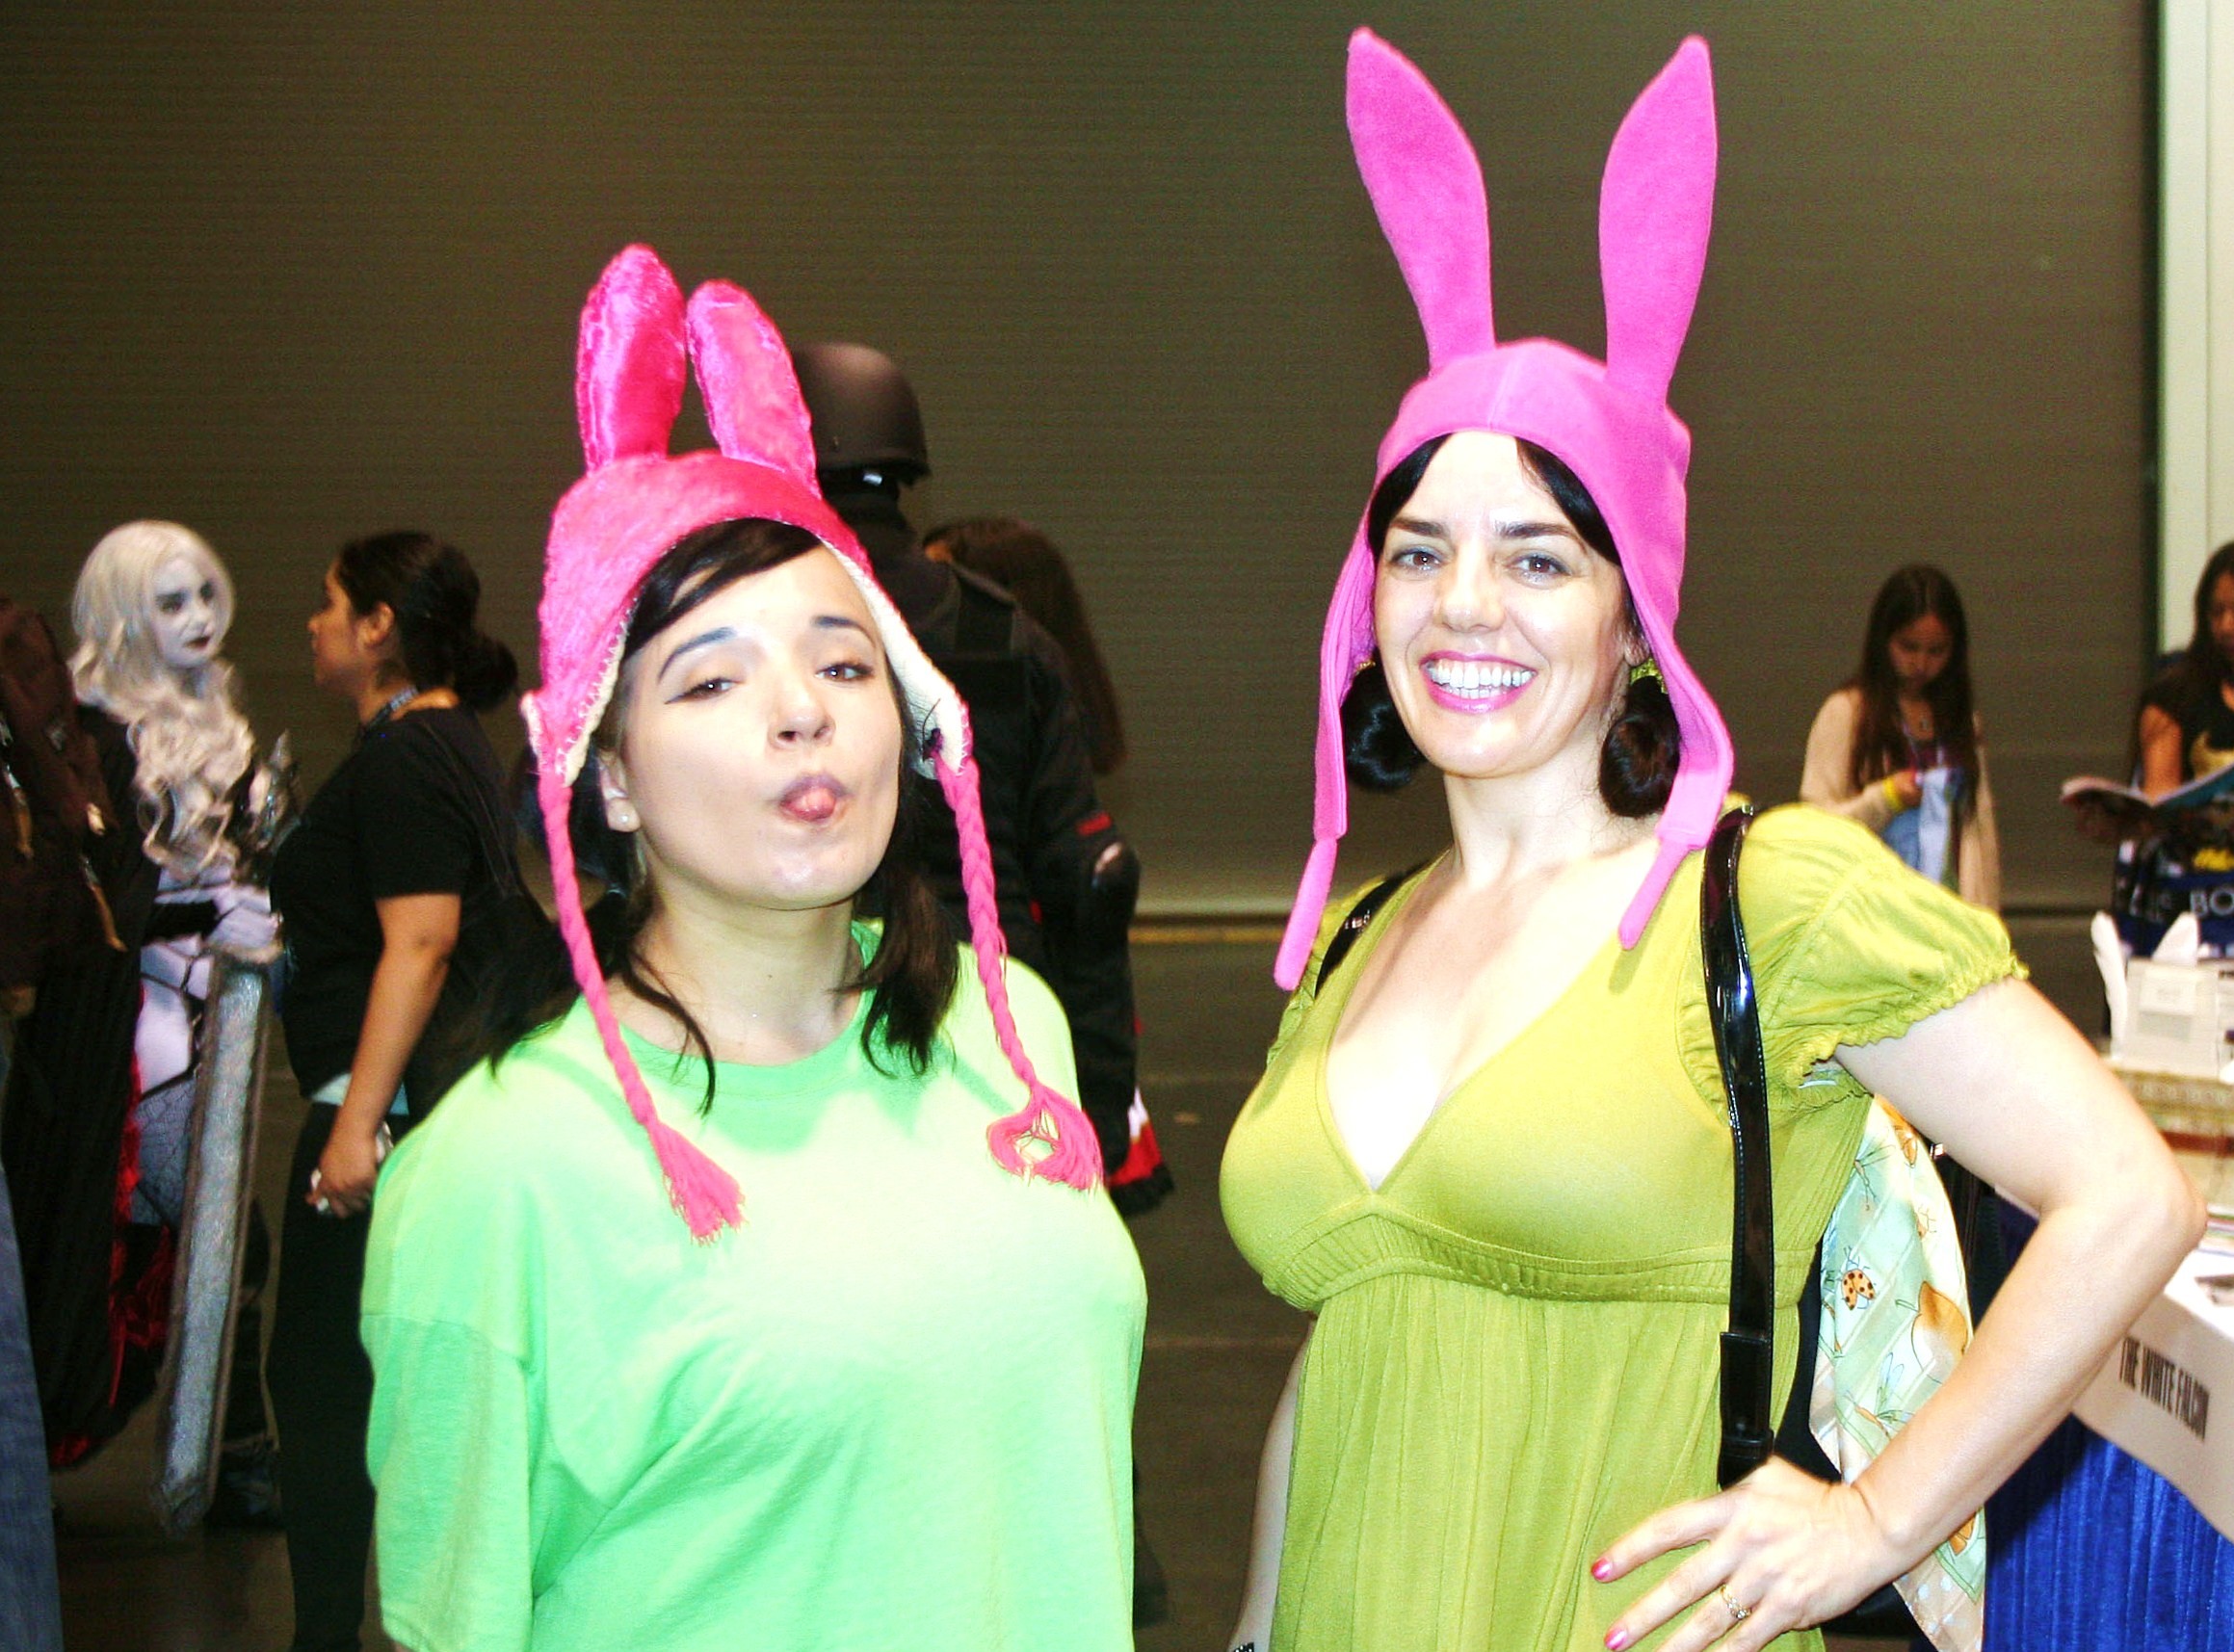 JennyPop and fellow dork, confidently rocking the iconic Louise ears. Photo: Twisted Pair Photography, WonderCon Anaheim